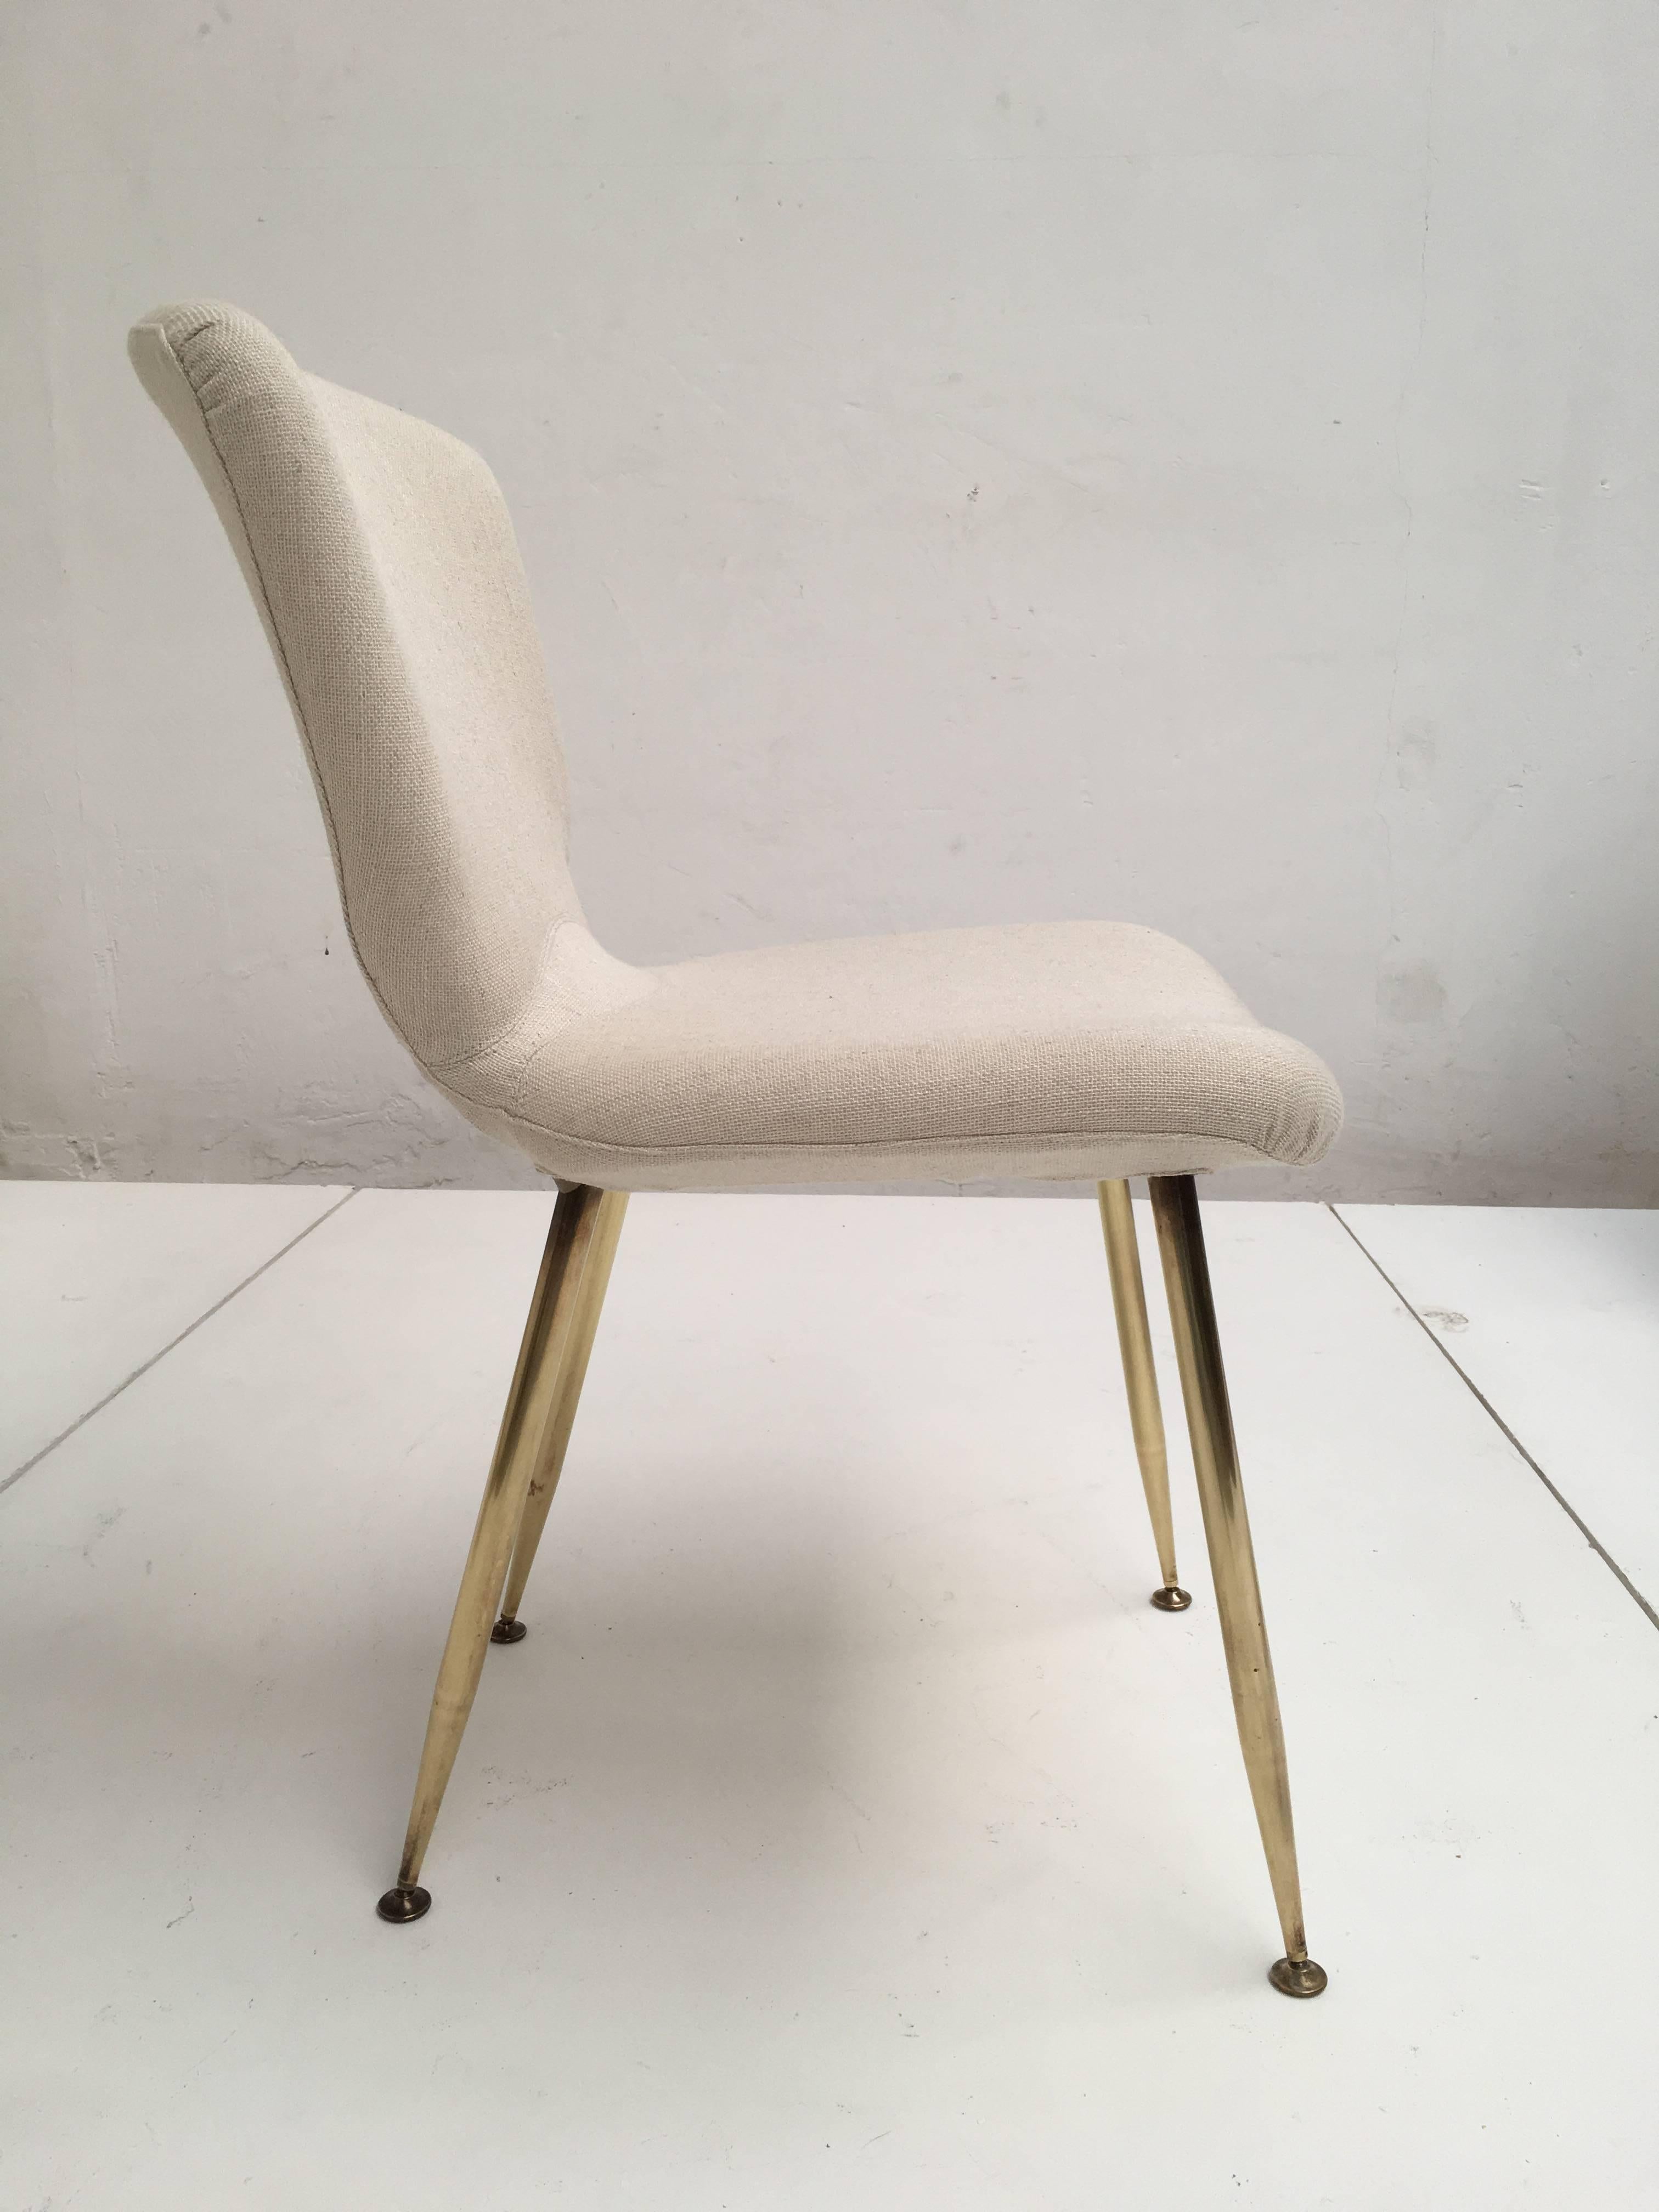 10 Dining Chairs by Louis Sognot for Arflex, 1959, brass legs, Upholstery Restored 1